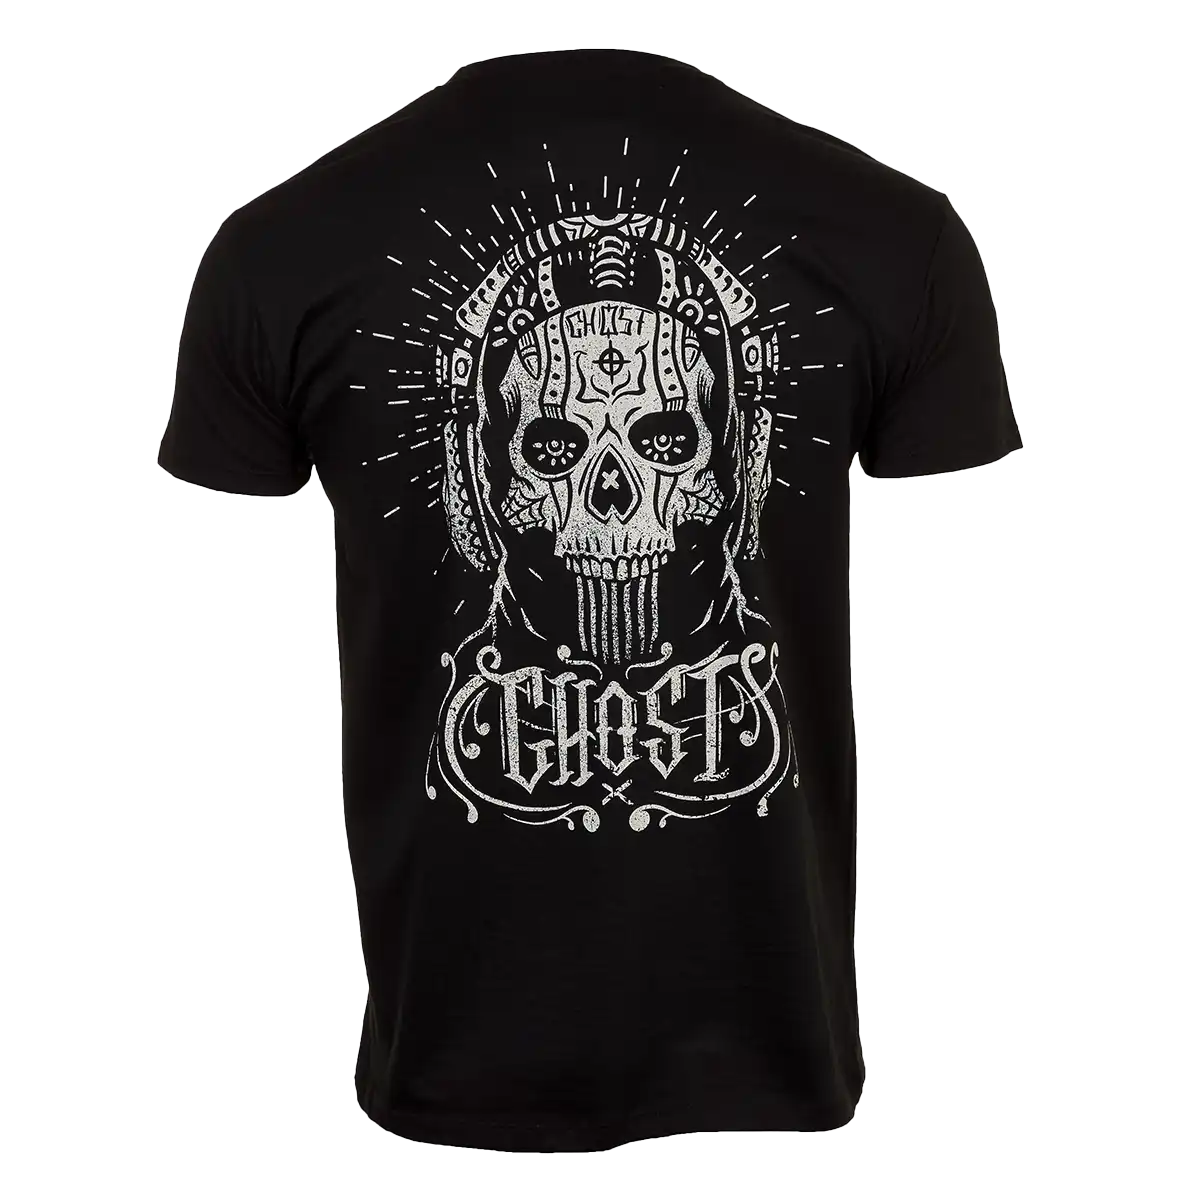 Call of Duty T-Shirt "Ghost" Black M Image 2